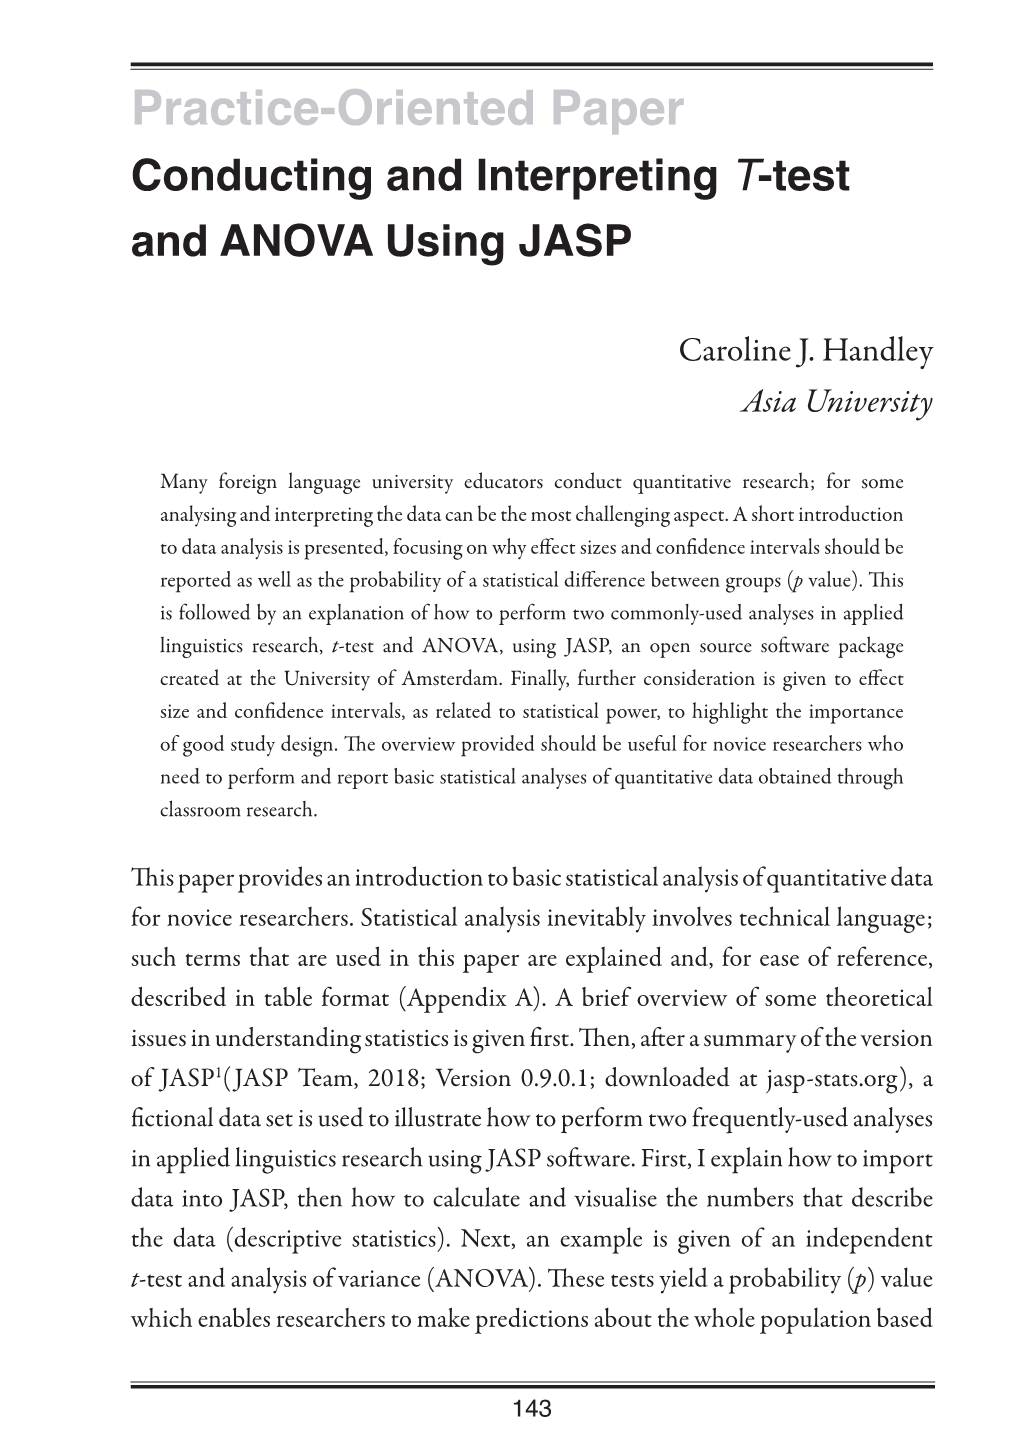 Practice-Oriented Paper Conducting and Interpreting T-Test and ANOVA Using JASP